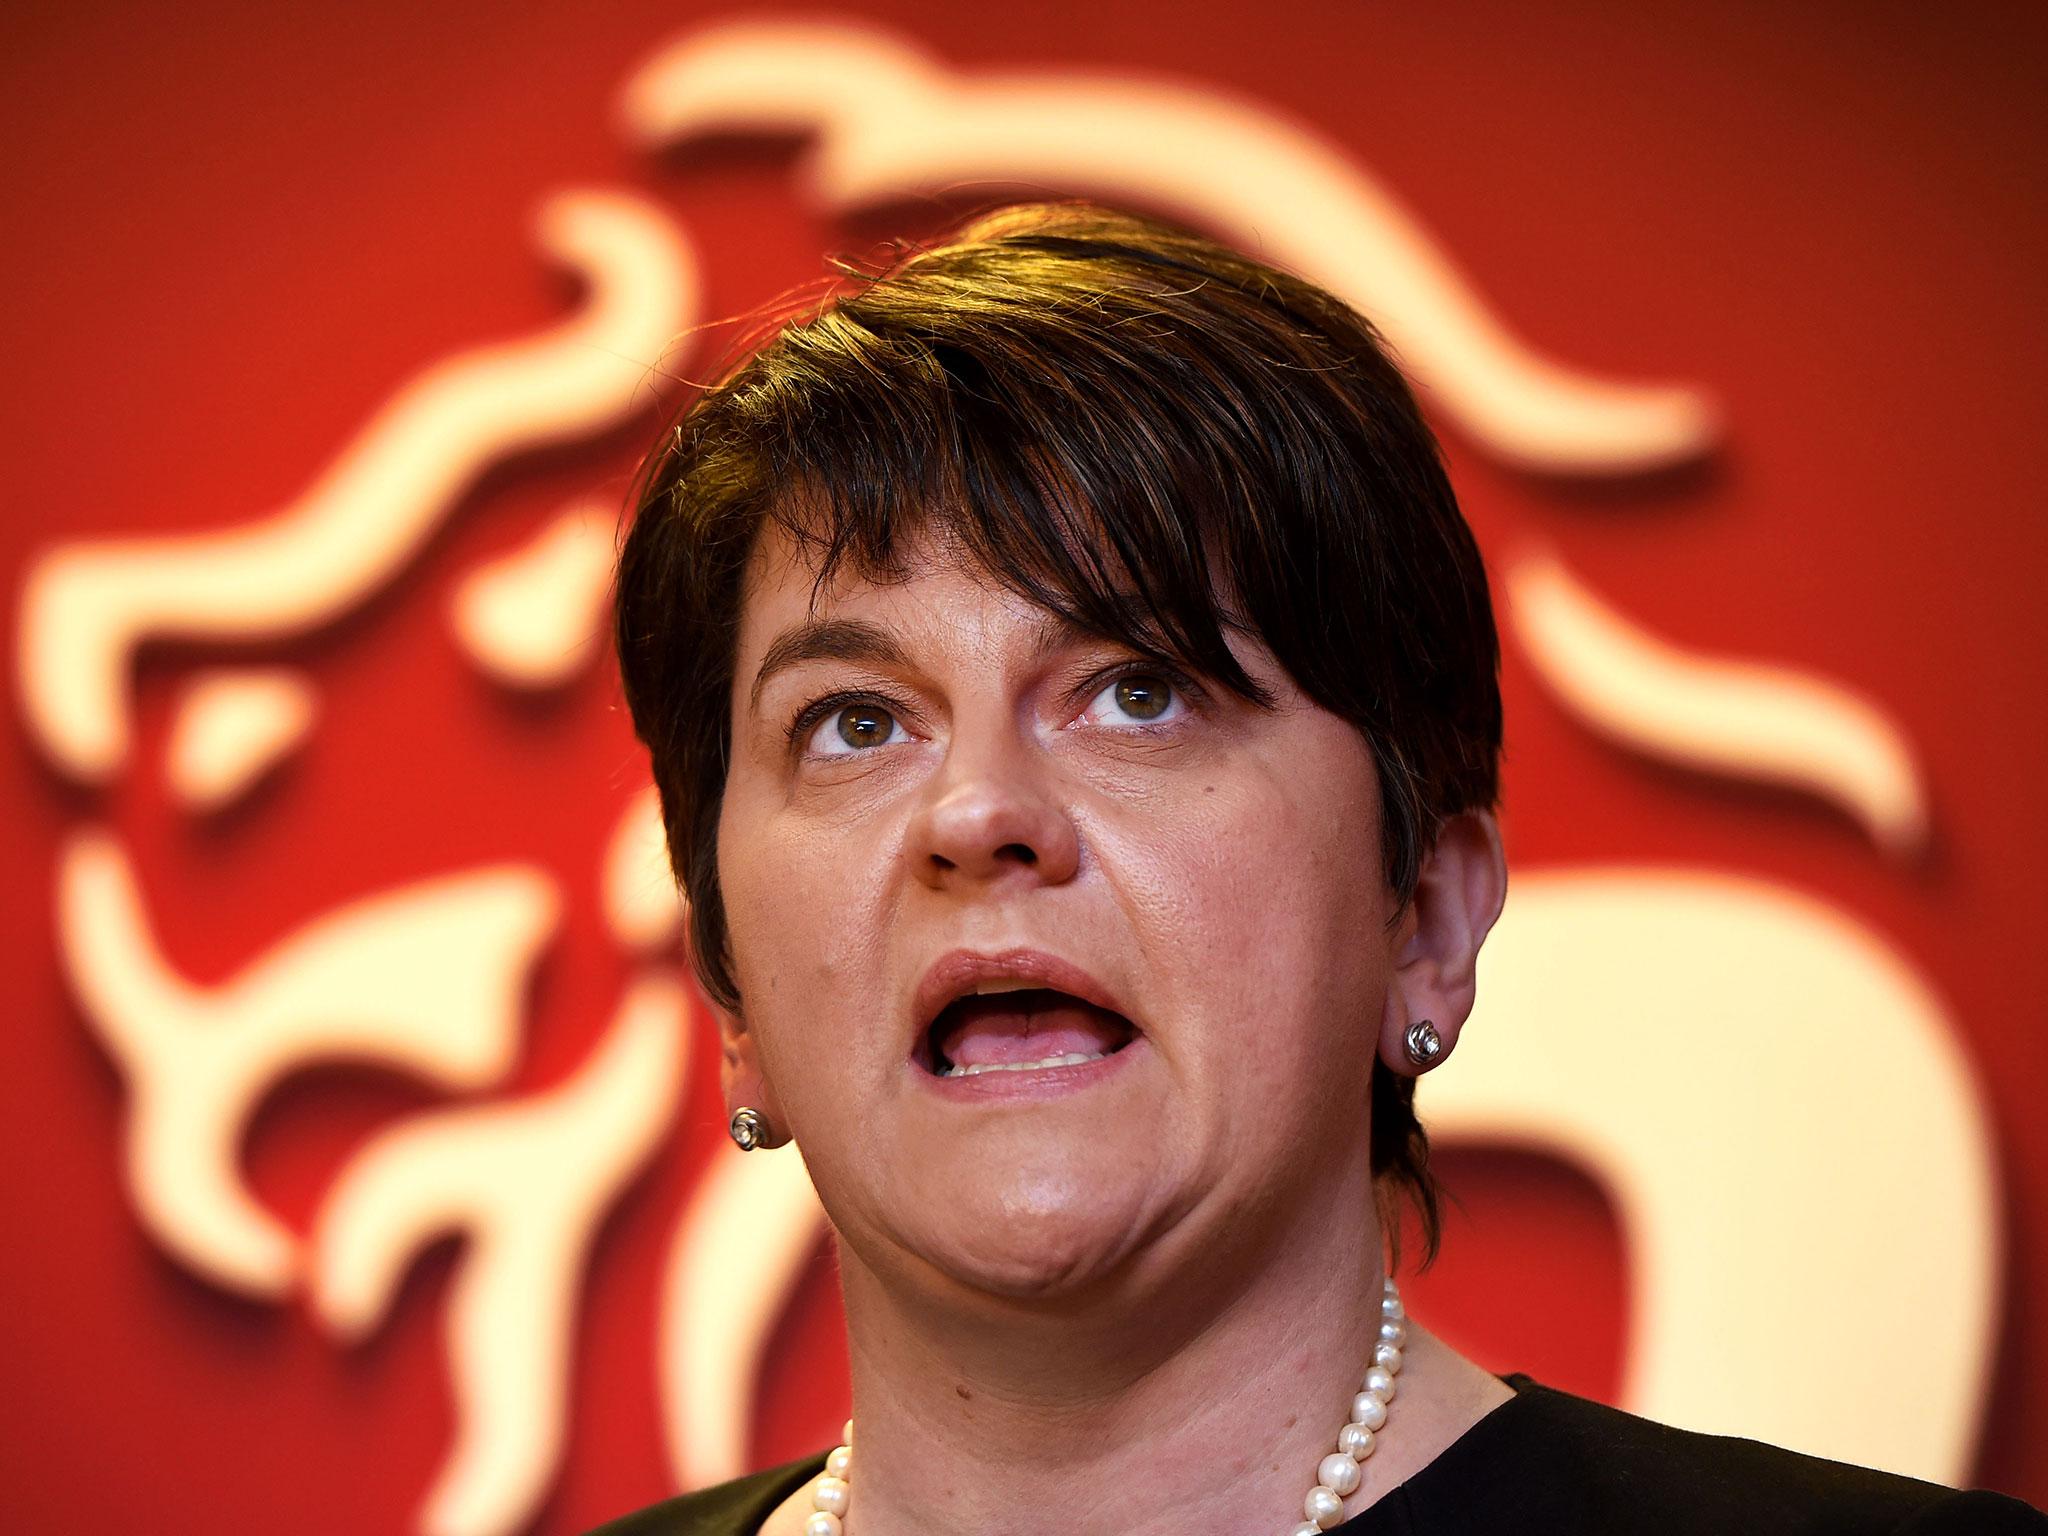 Arlene Foster, leader of the Democratic Unionist Party, was head of the department responsible at the time and faced calls to stand down